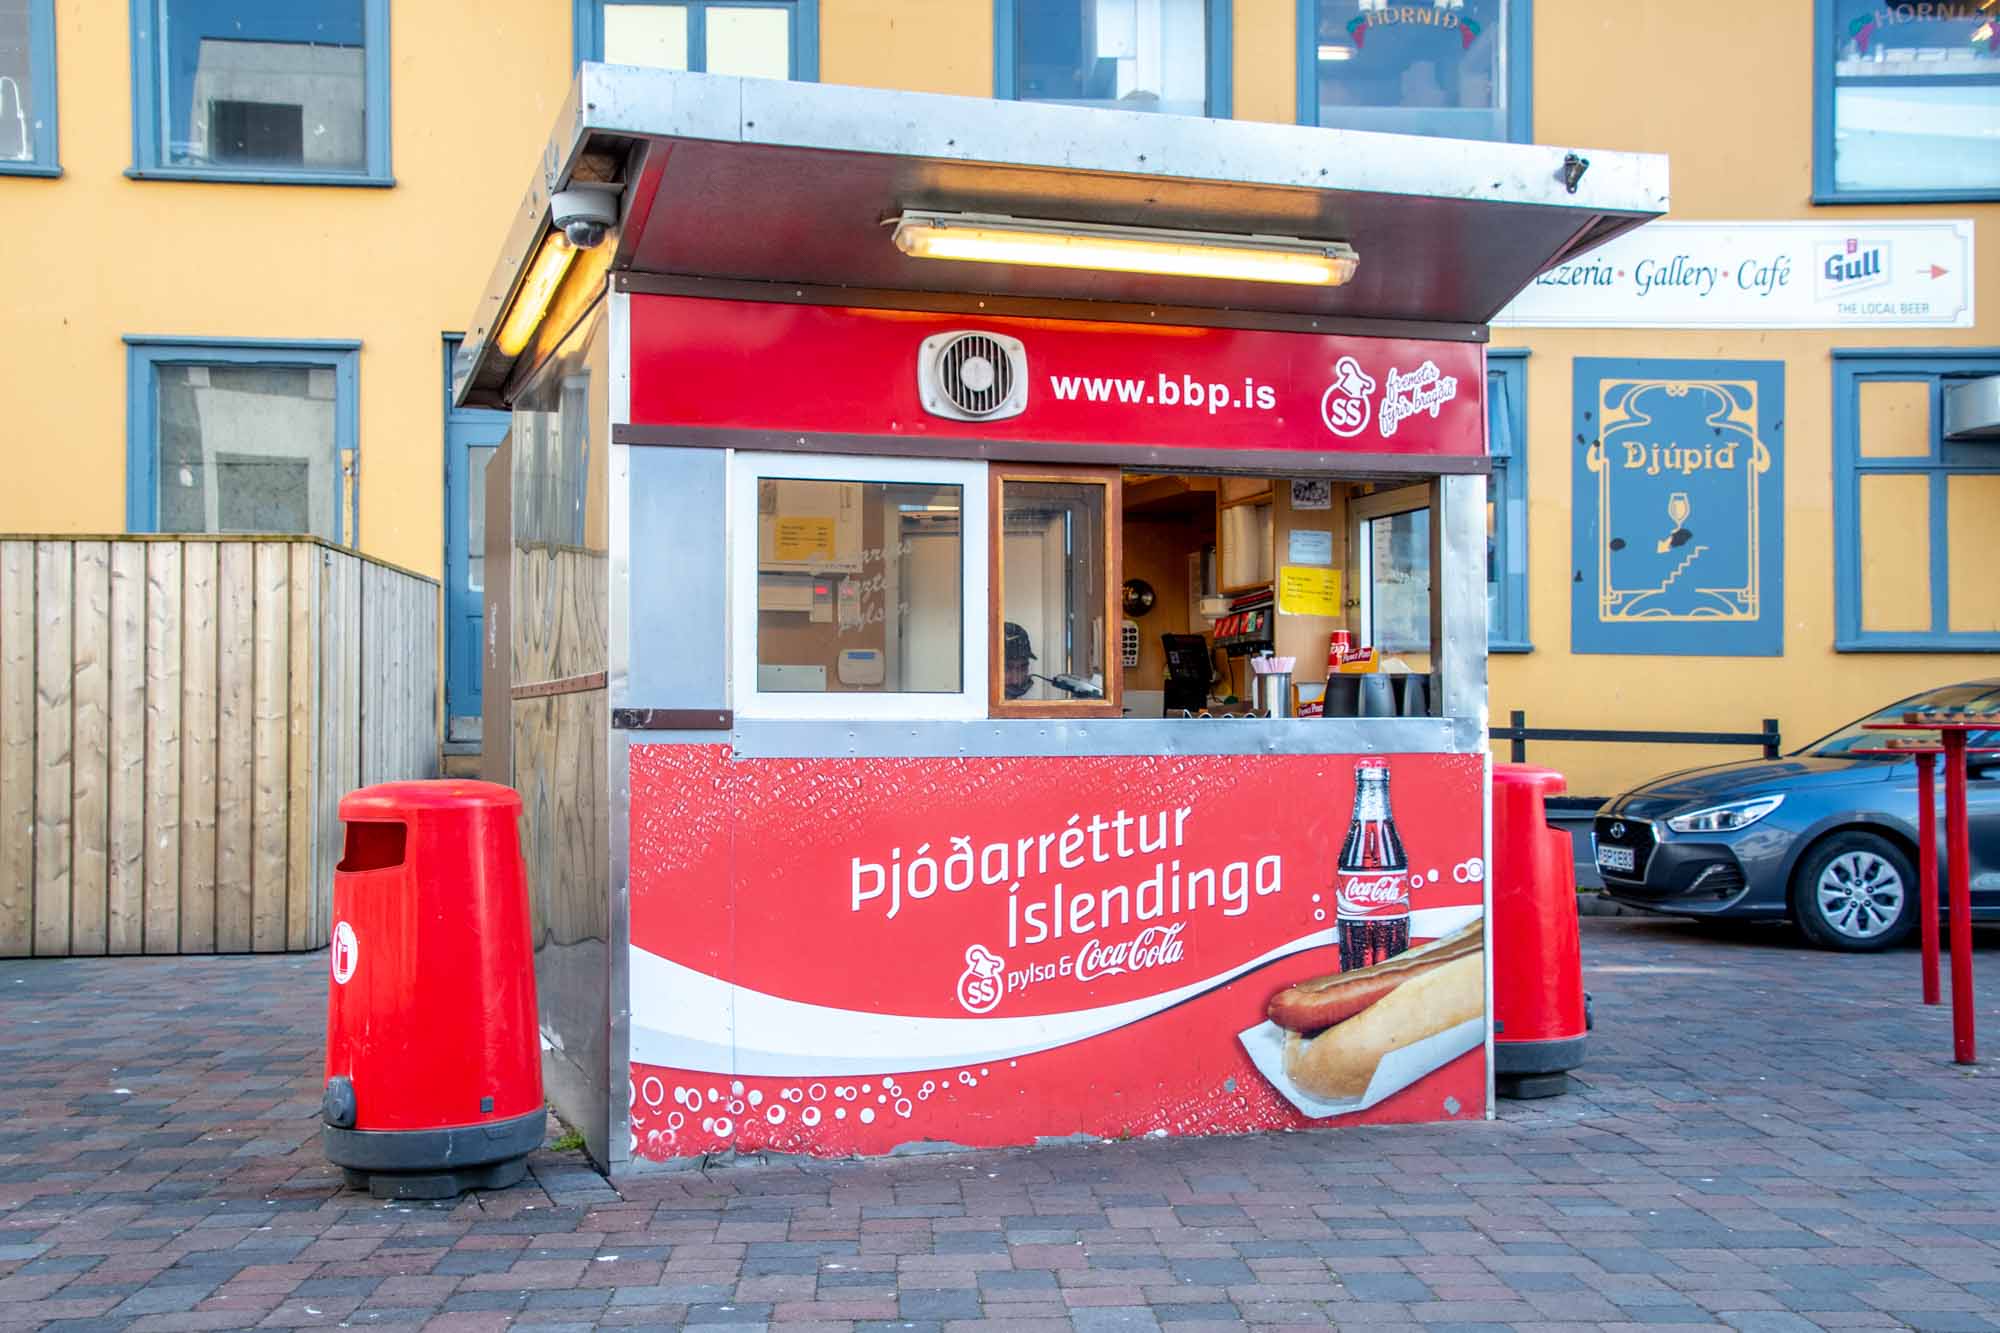 Red and white hot dog stand with coke advertisement